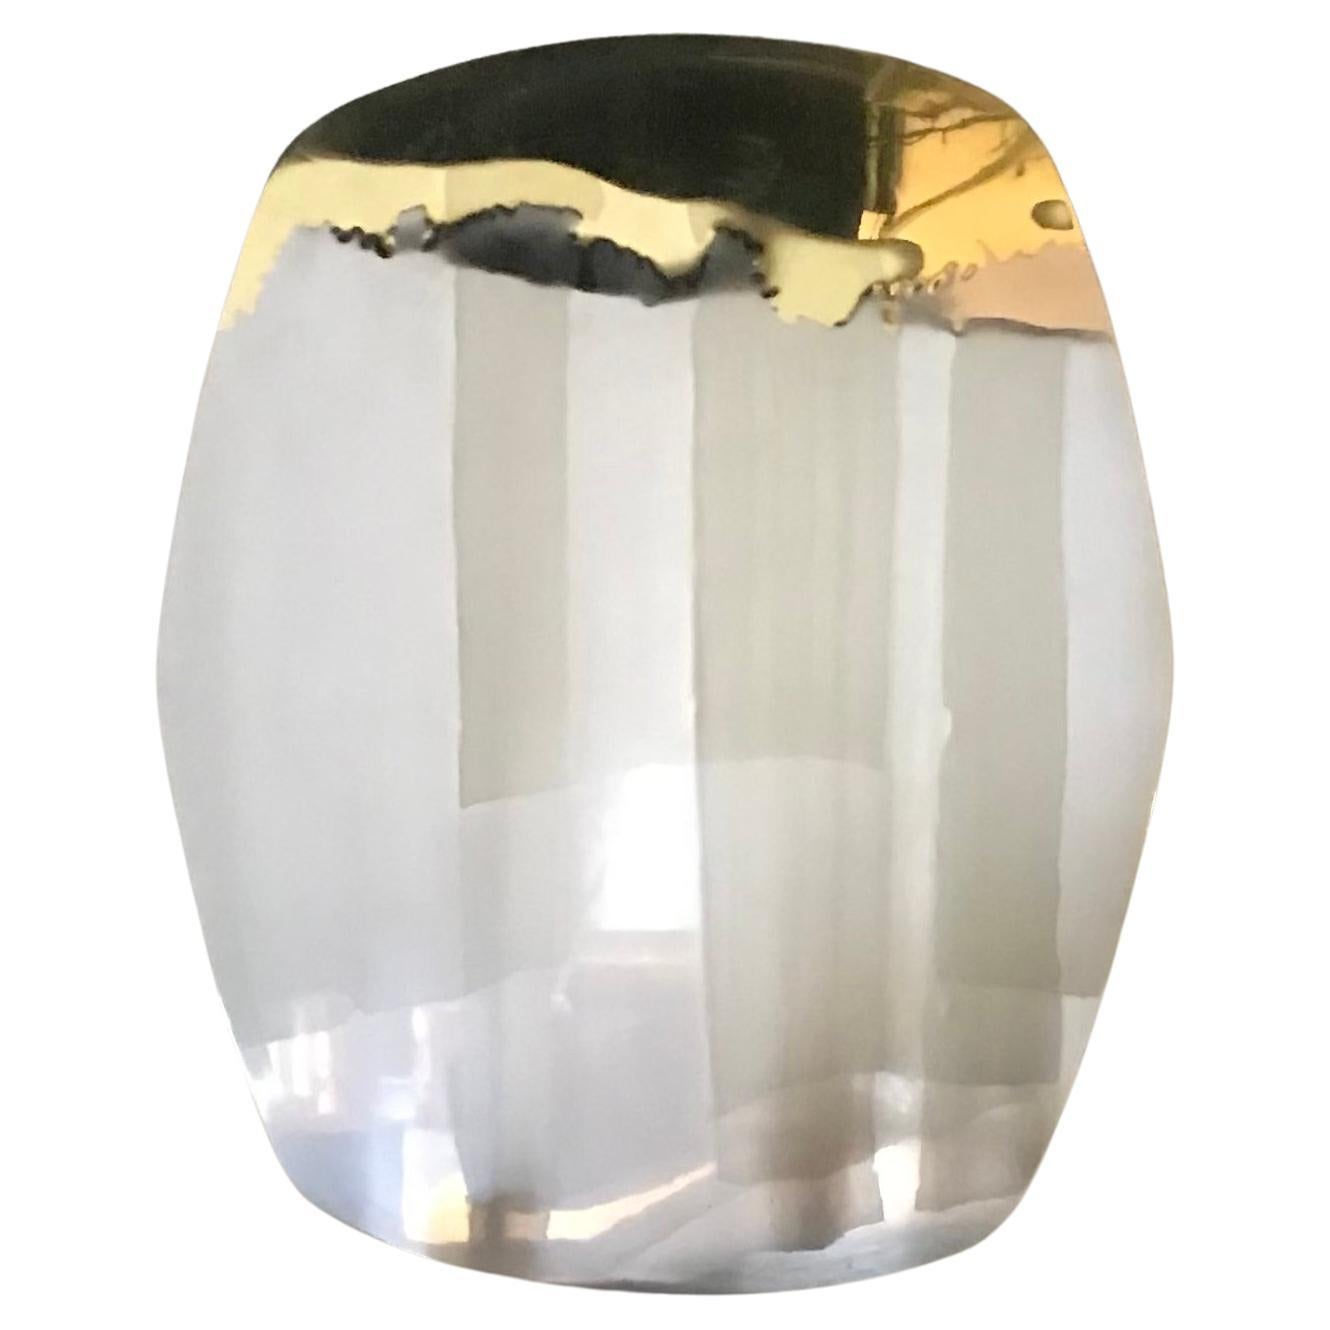 New Transition Mirror in Polished Metal Stainless Steel Brass Finish in Stock